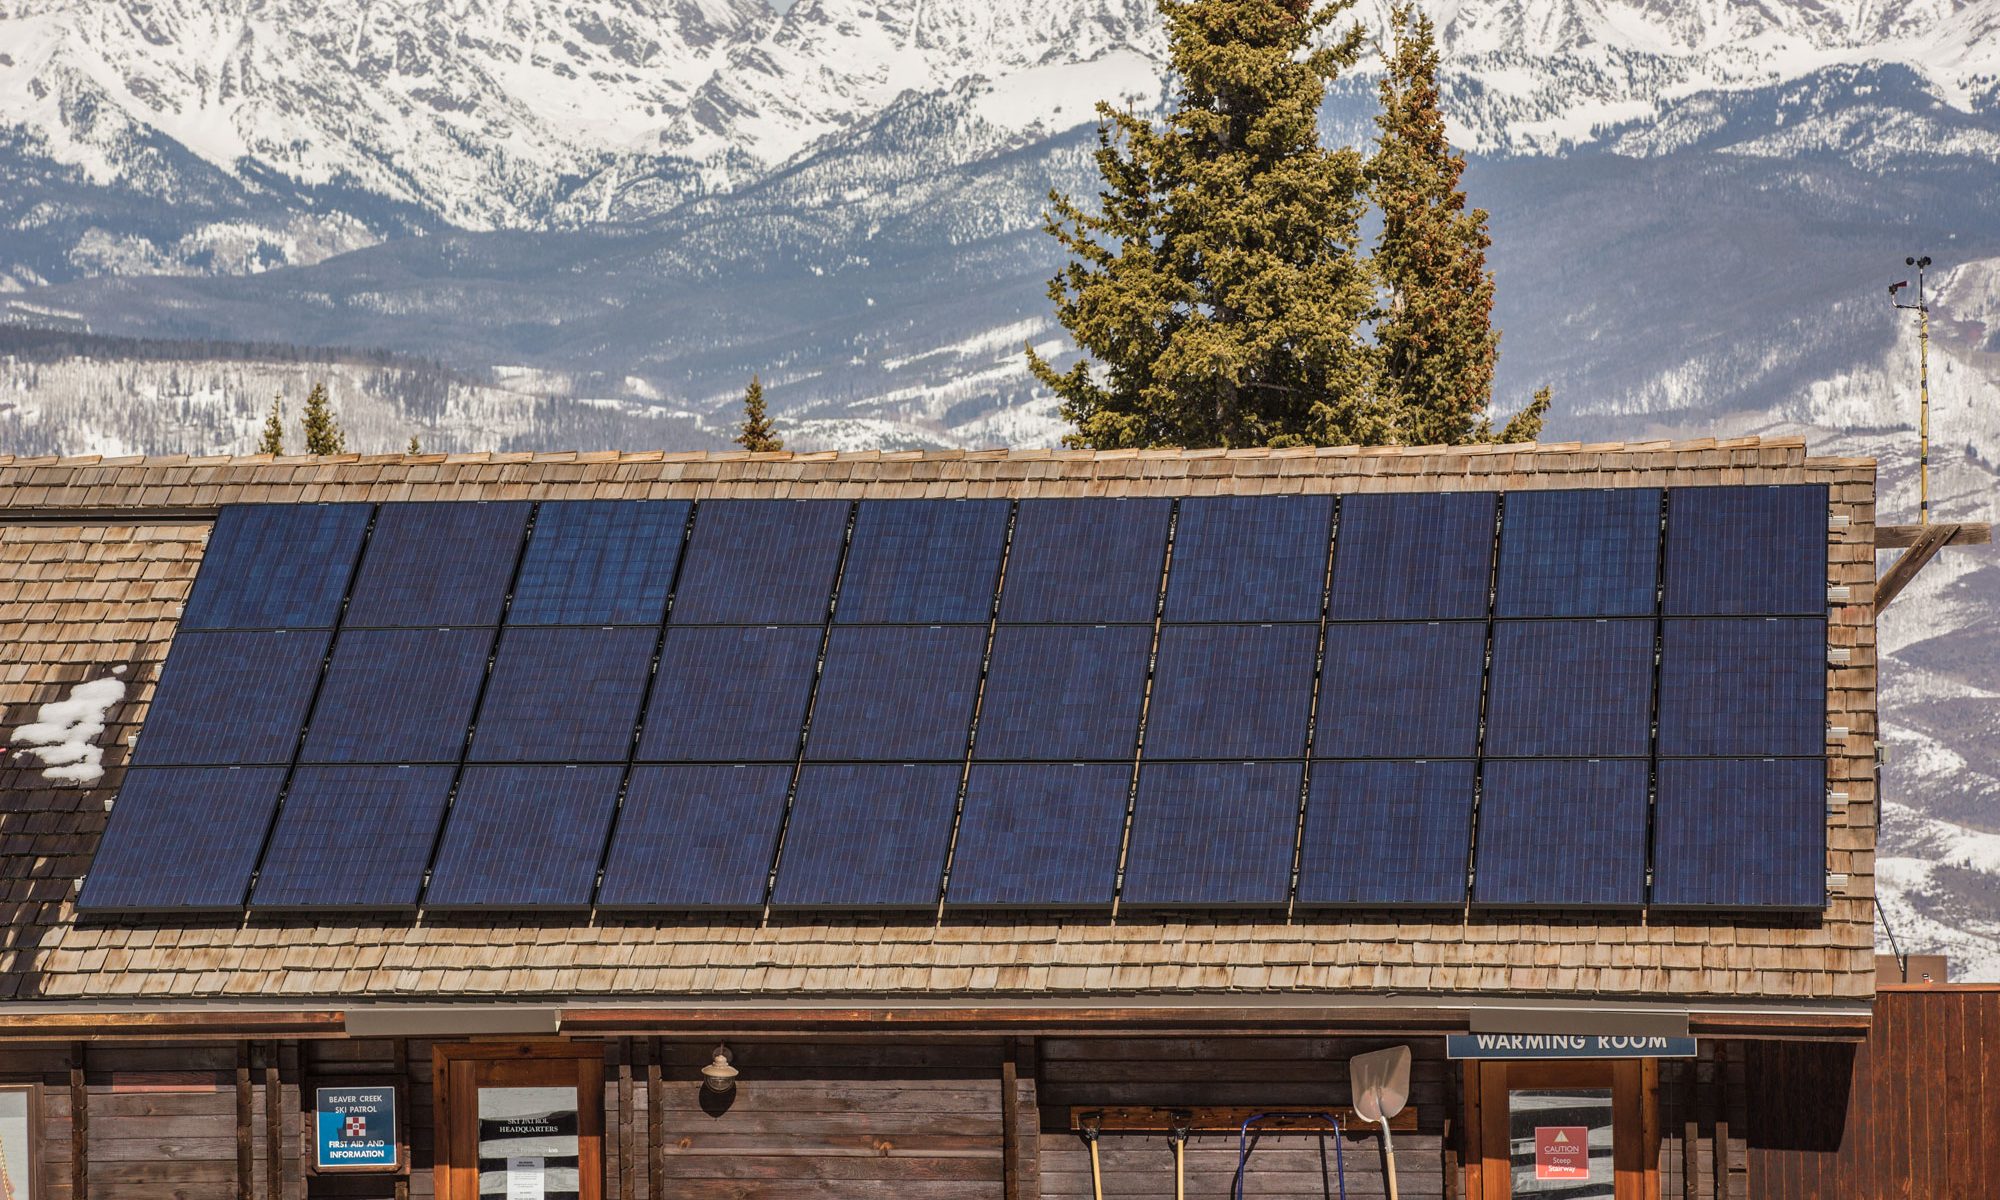 Beaver Creek solar panel. Vail Resorts Announces Long-Term Wind Energy Contract And Plan To Eliminate Conventional Single-Use Dining Plastics In Its ‘Commitment To Zero’. Photo: Vail Resorts.